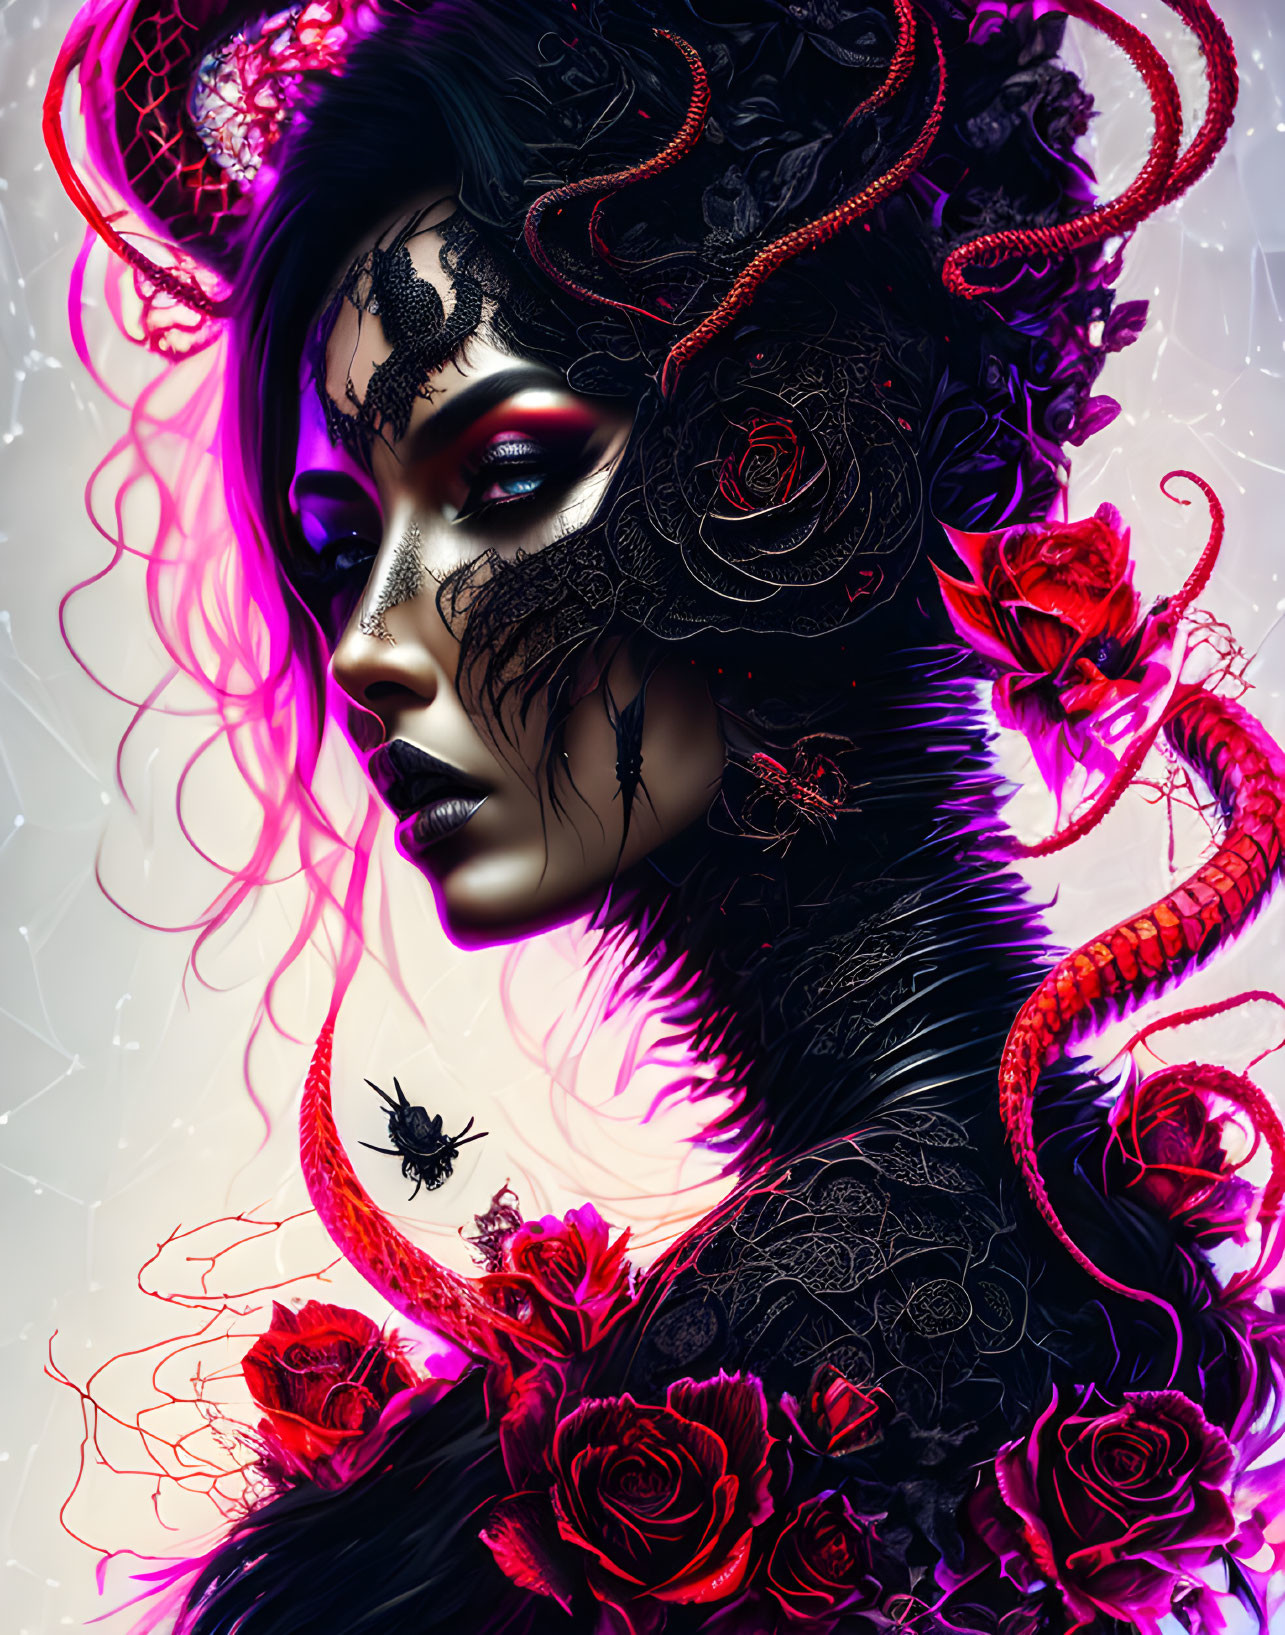 Detailed gothic woman illustration with roses, headdress, and serpentine creatures.